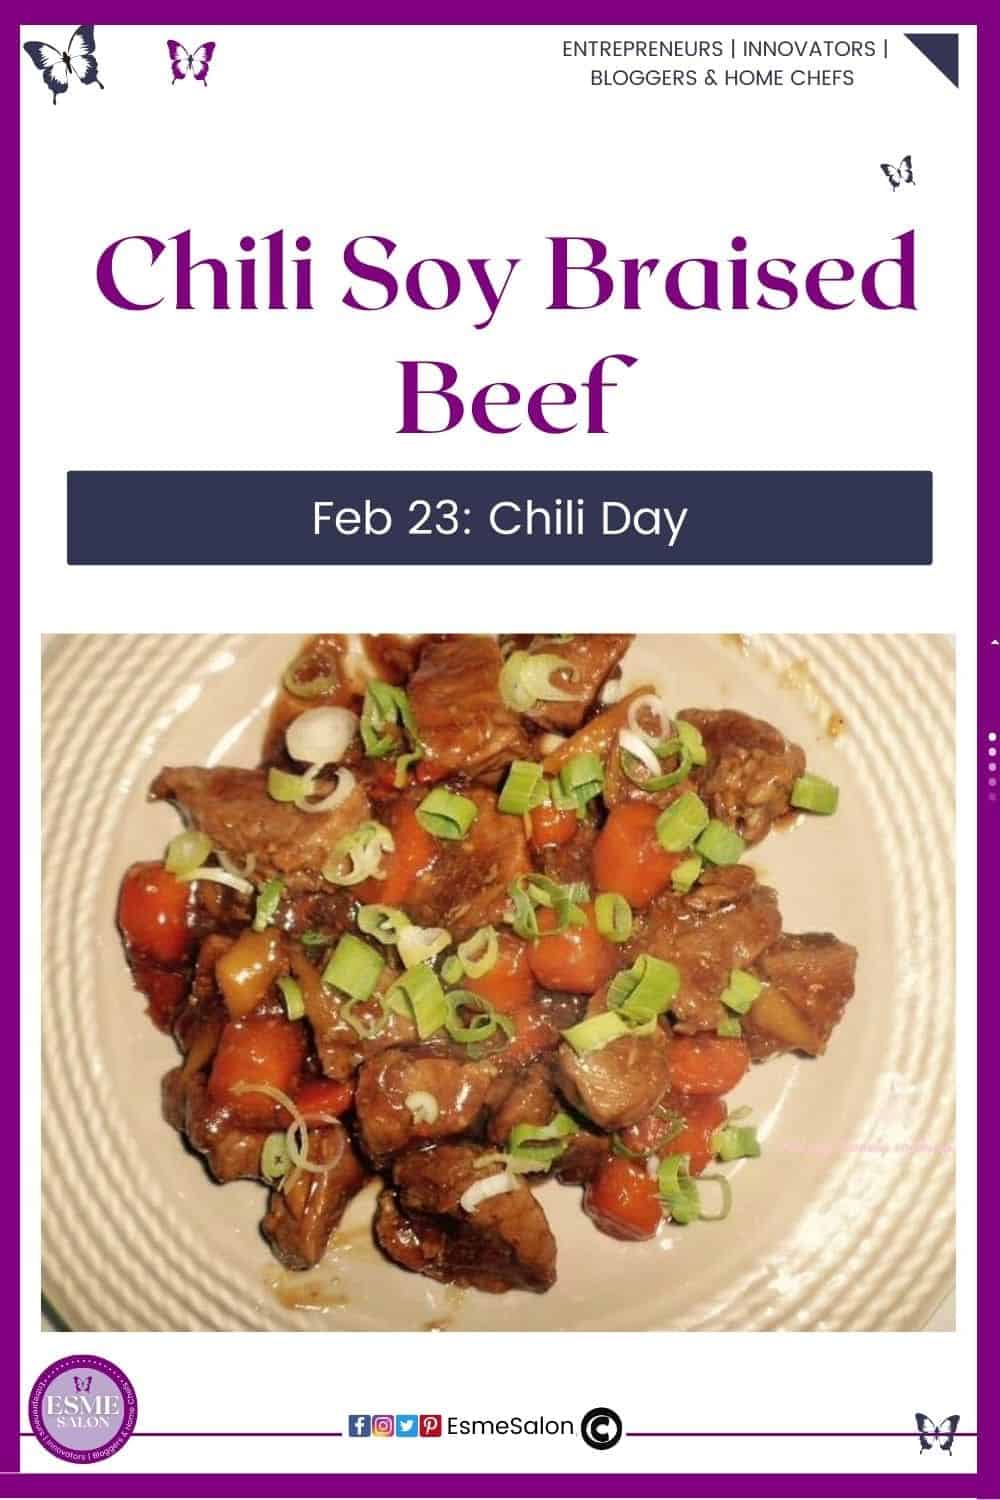 an image of Chili Soy Braised Beef done in Slow Cooker